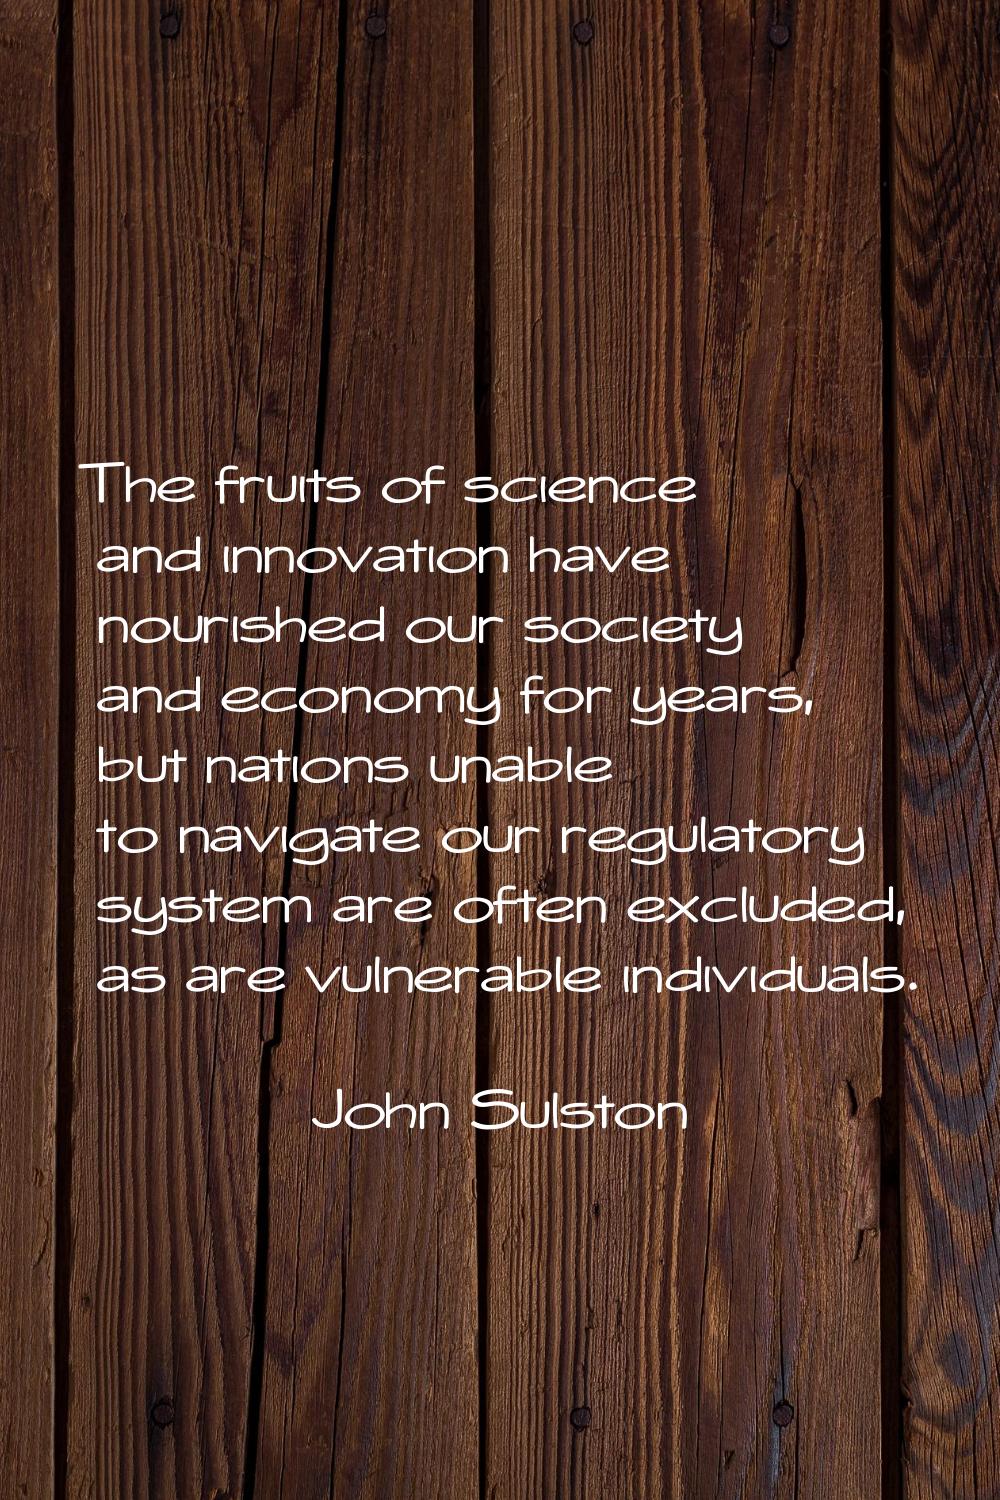 The fruits of science and innovation have nourished our society and economy for years, but nations 